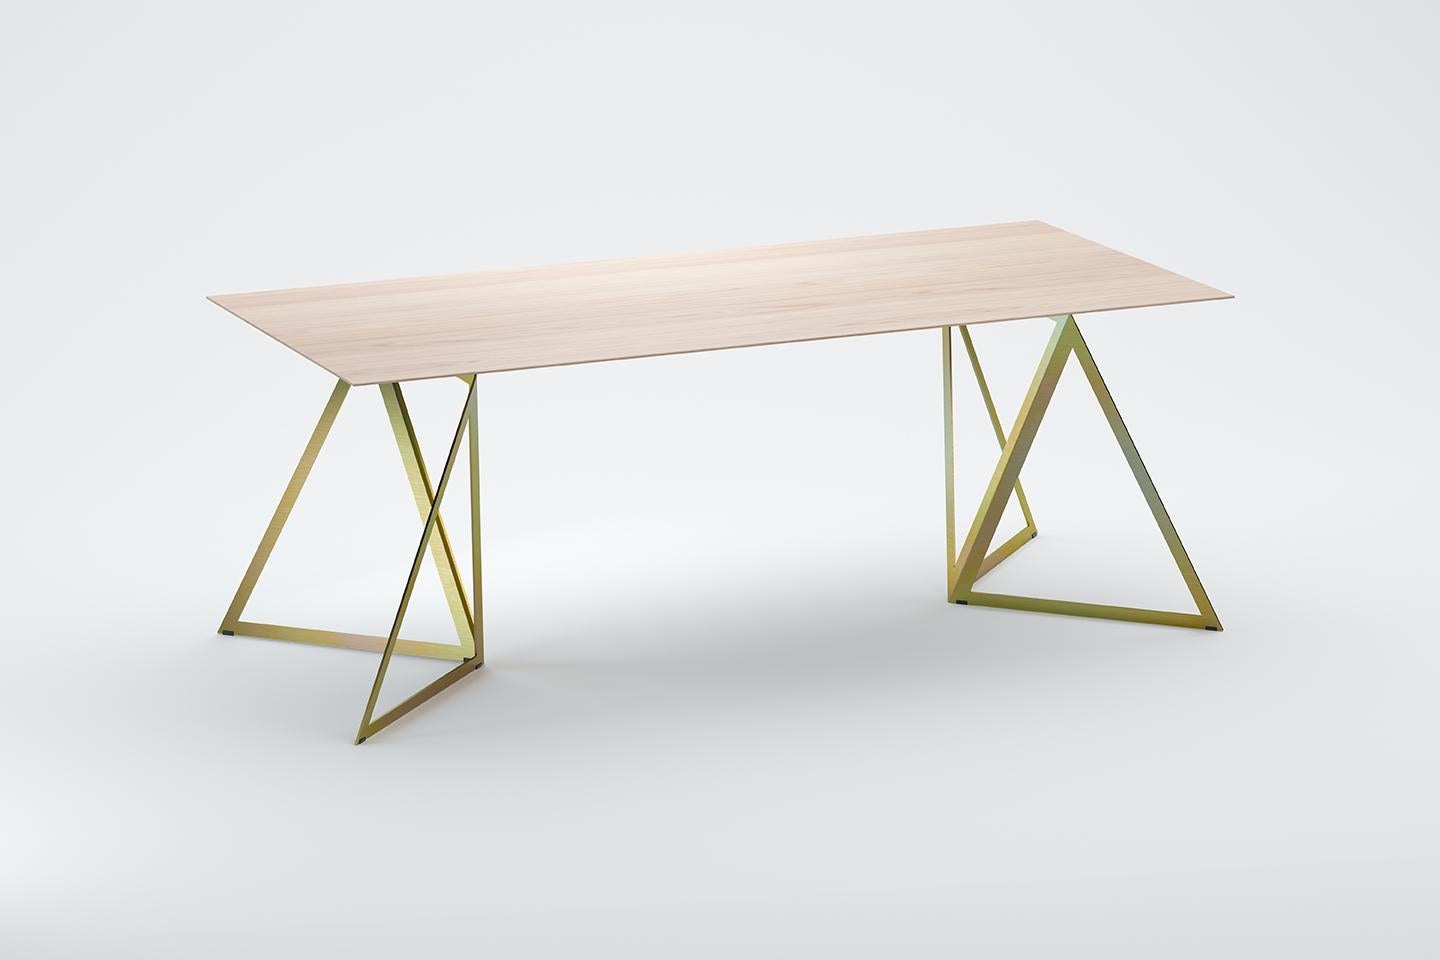 Steel stand table 200 ash by Sebastian Scherer
Dimensions: D 200 x W 90 x H 74 cm
Materials: Ash, steel, wood
Also available: Colours:Solid wood (matt lacquered or oiled): black and white stained ash / natural oak / american walnut
Steel (matt):